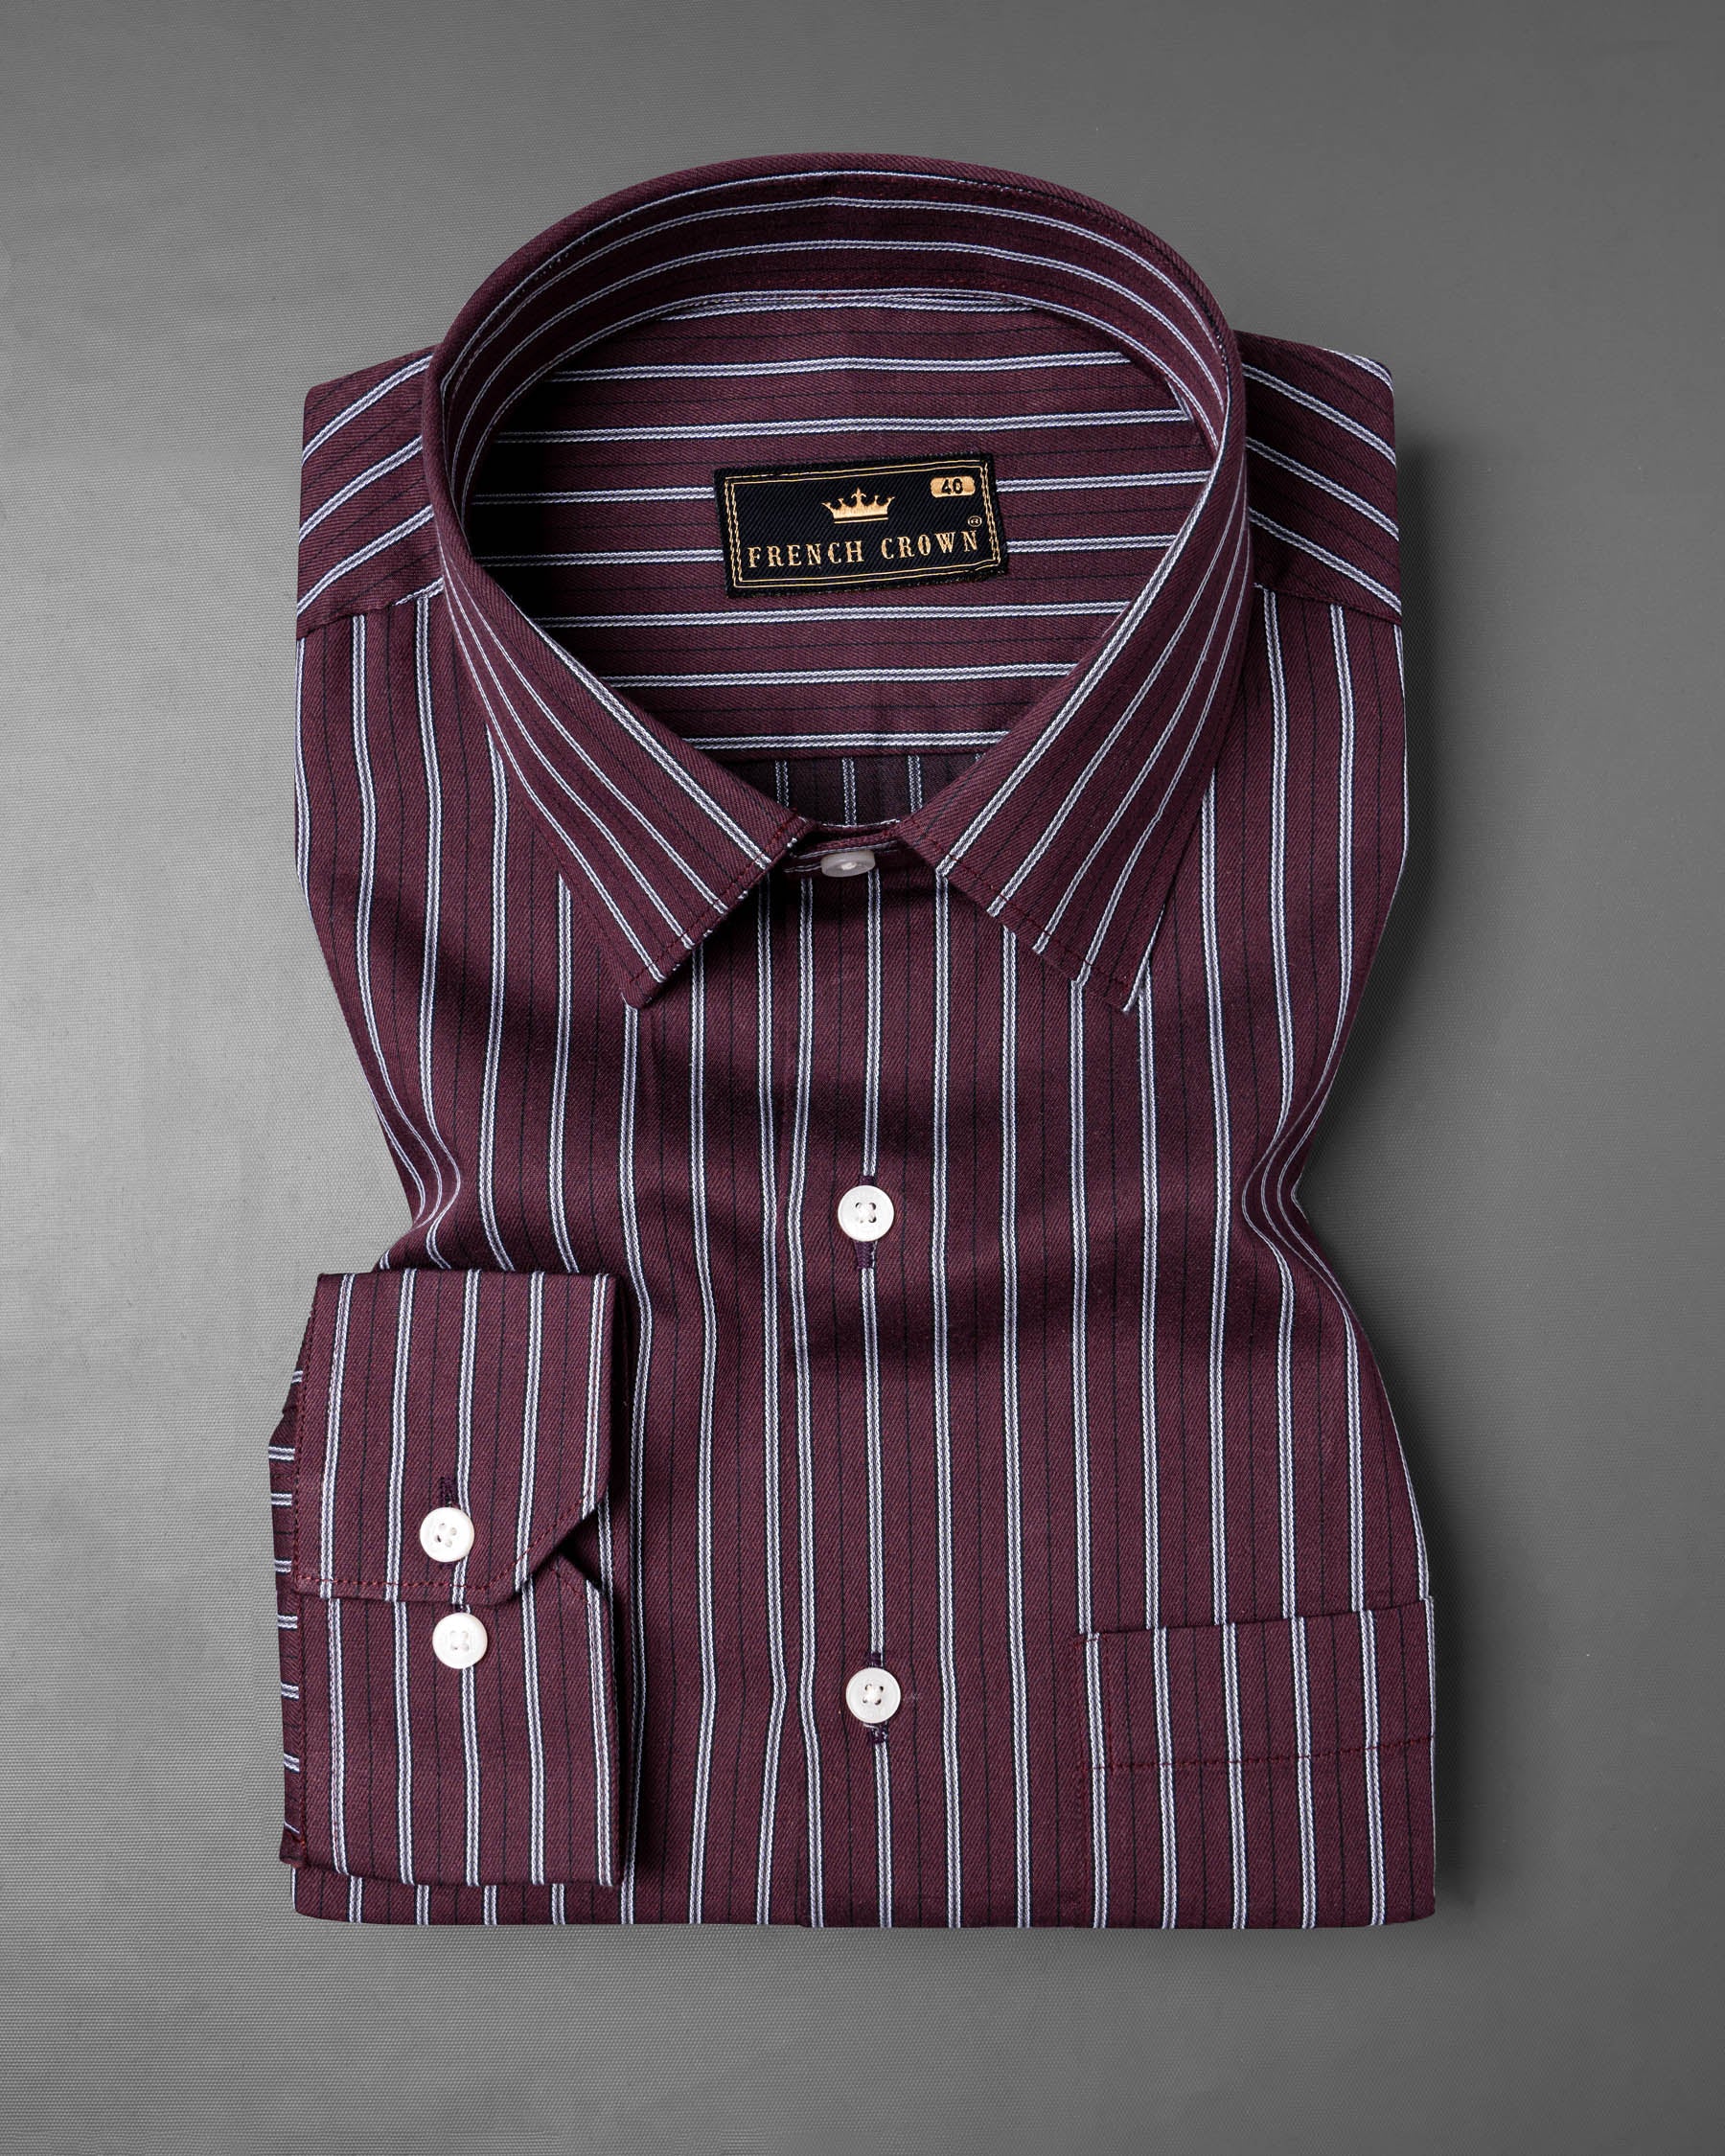 Bistre with Black and white Striped Twill Textured Premium Cotton Shirt 6886-38, 6886-H-38, 6886-39, 6886-H-39, 6886-40, 6886-H-40, 6886-42, 6886-H-42, 6886-44, 6886-H-44, 6886-46, 6886-H-46, 6886-48, 6886-H-48, 6886-50, 6886-H-50, 6886-52, 6886-H-52